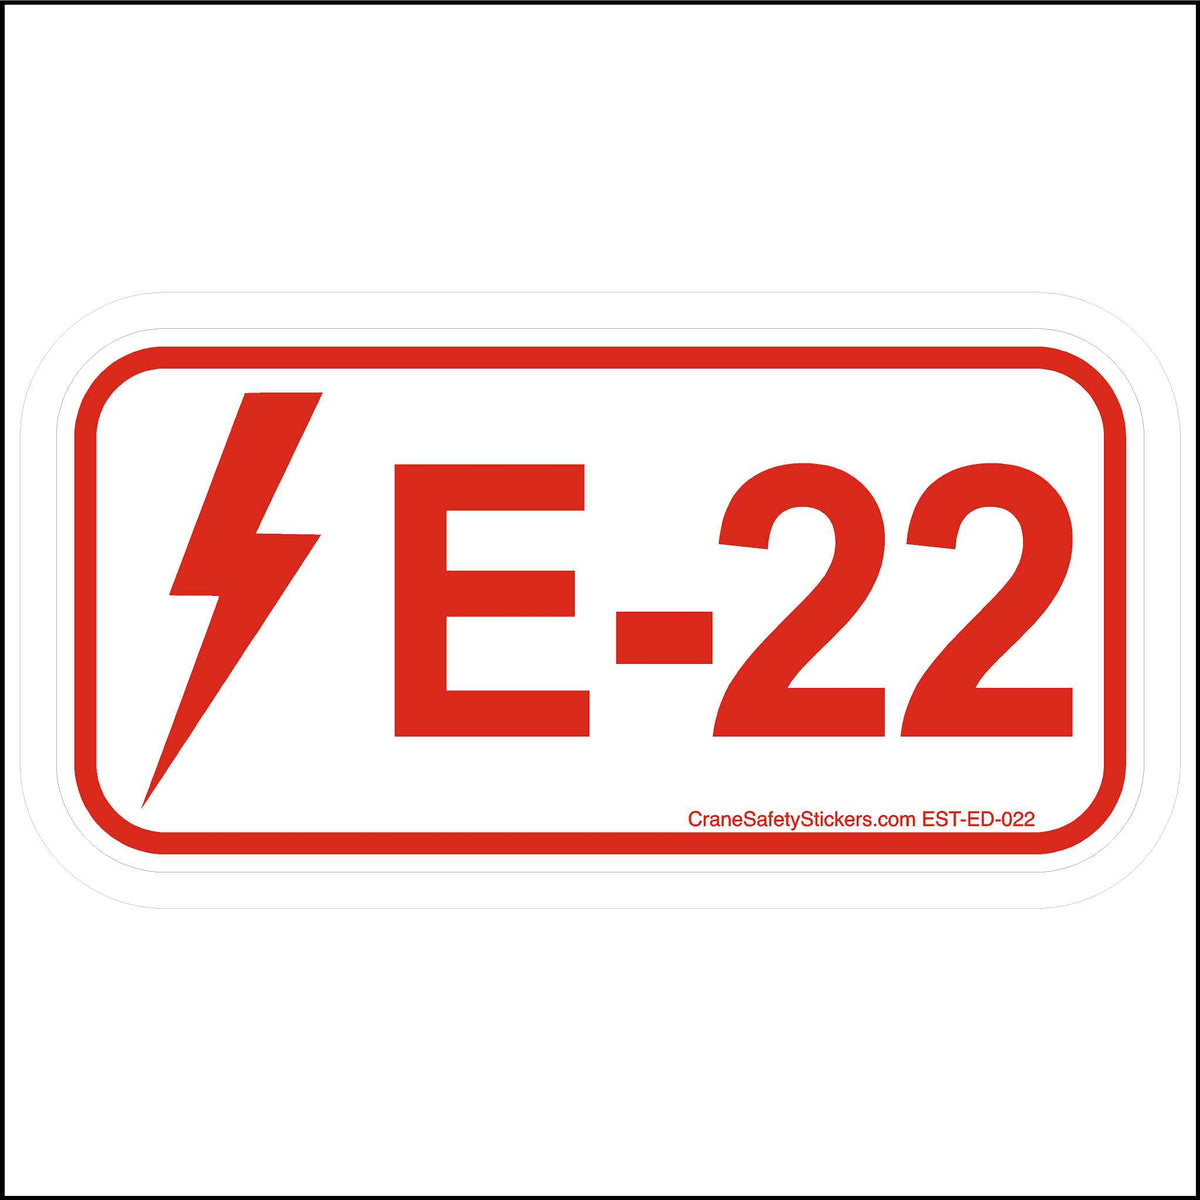 Energy Control Program Electrical Disconnect Stickers E-22.